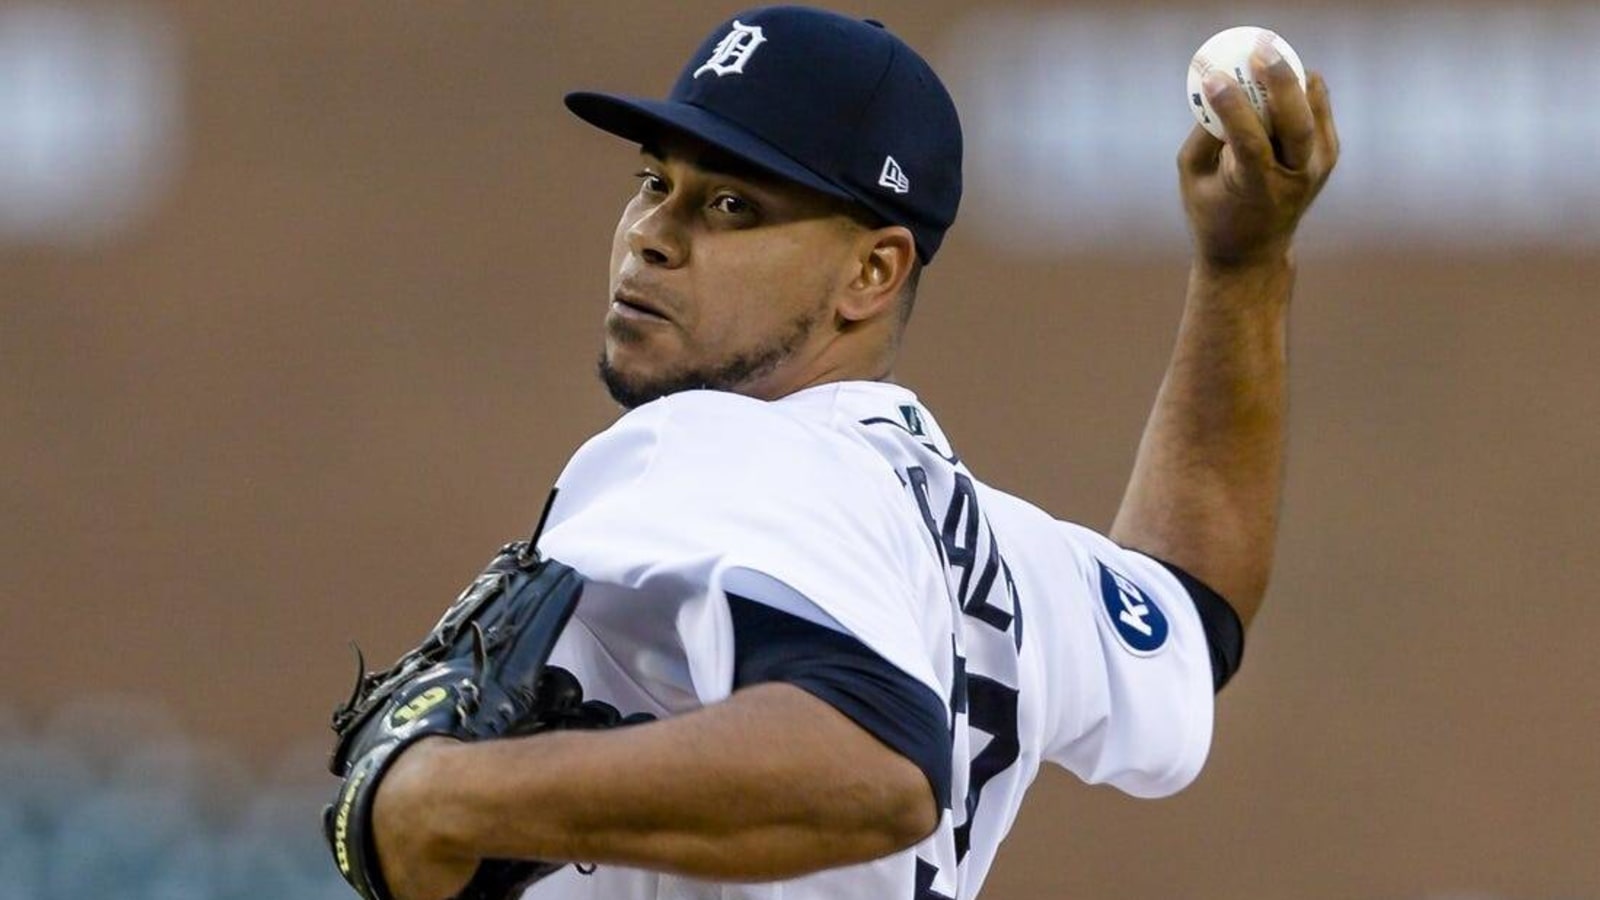 Tigers reliever Wily Peralta (hamstring) lands on injured list